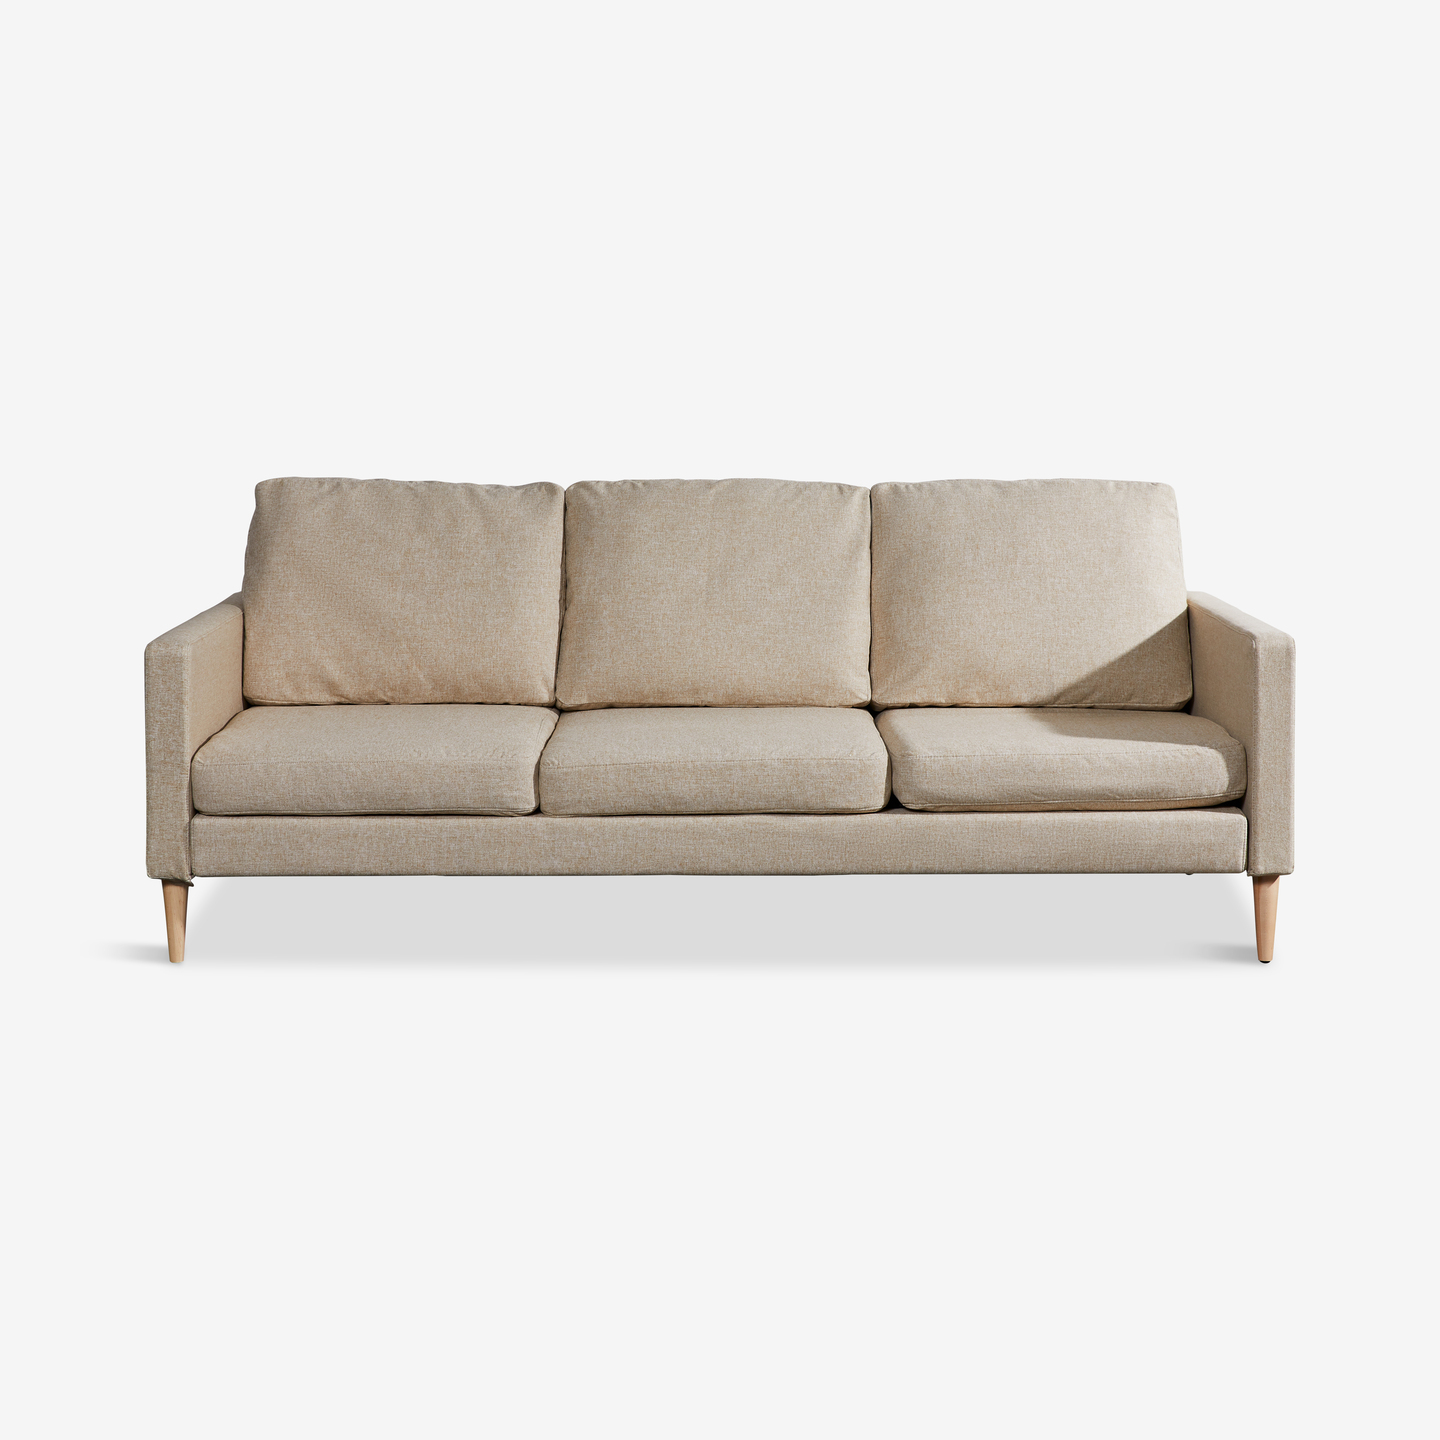 425_Campaign-Sofa-Textured-Oat_Flat-Front 2020